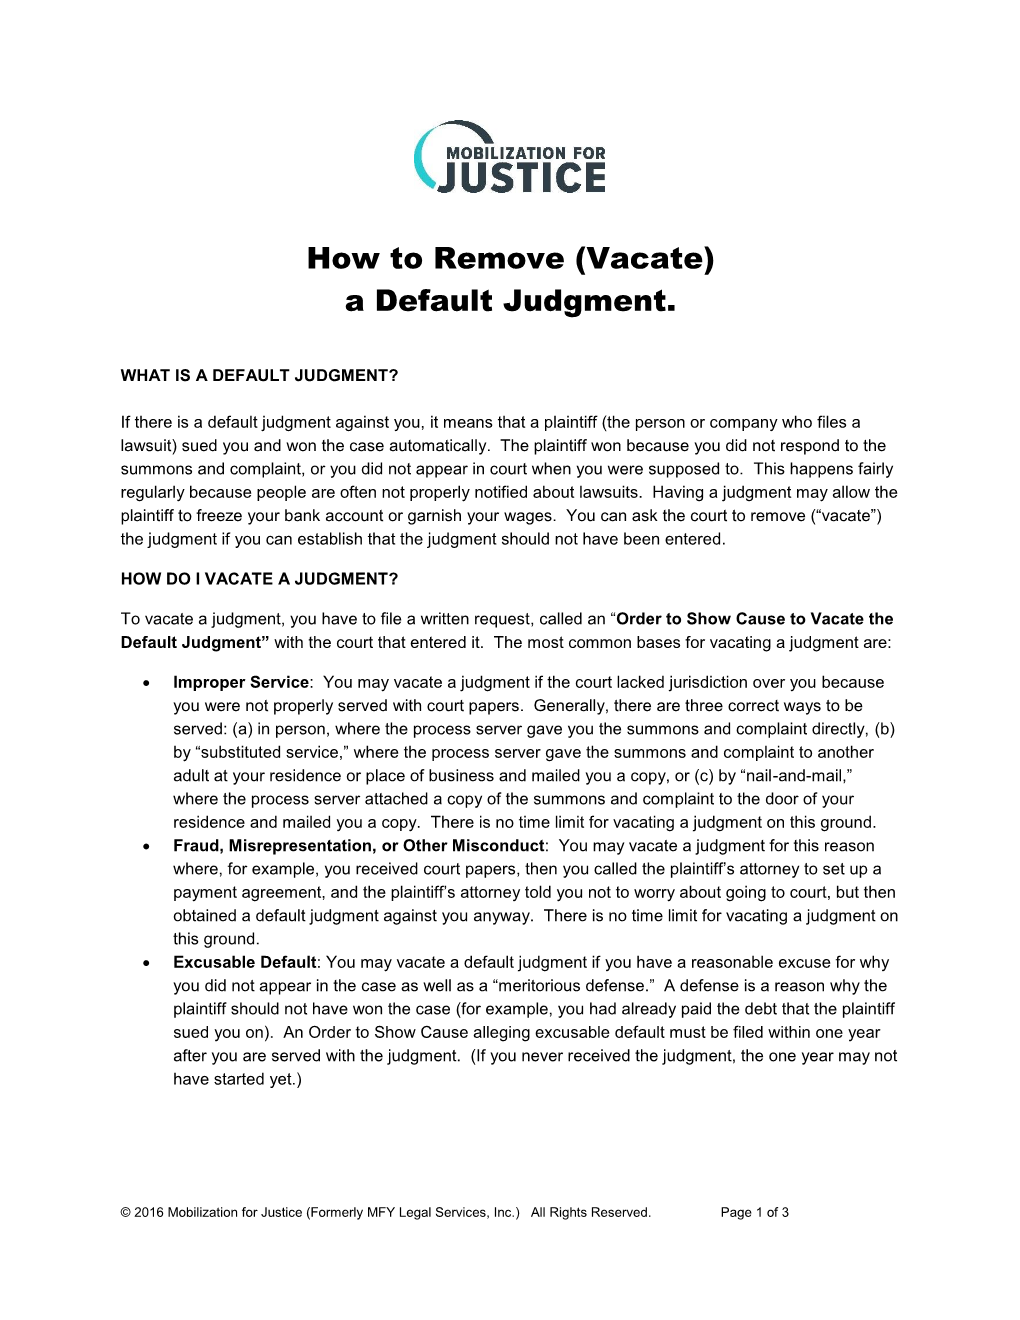 (Vacate) a Default Judgment